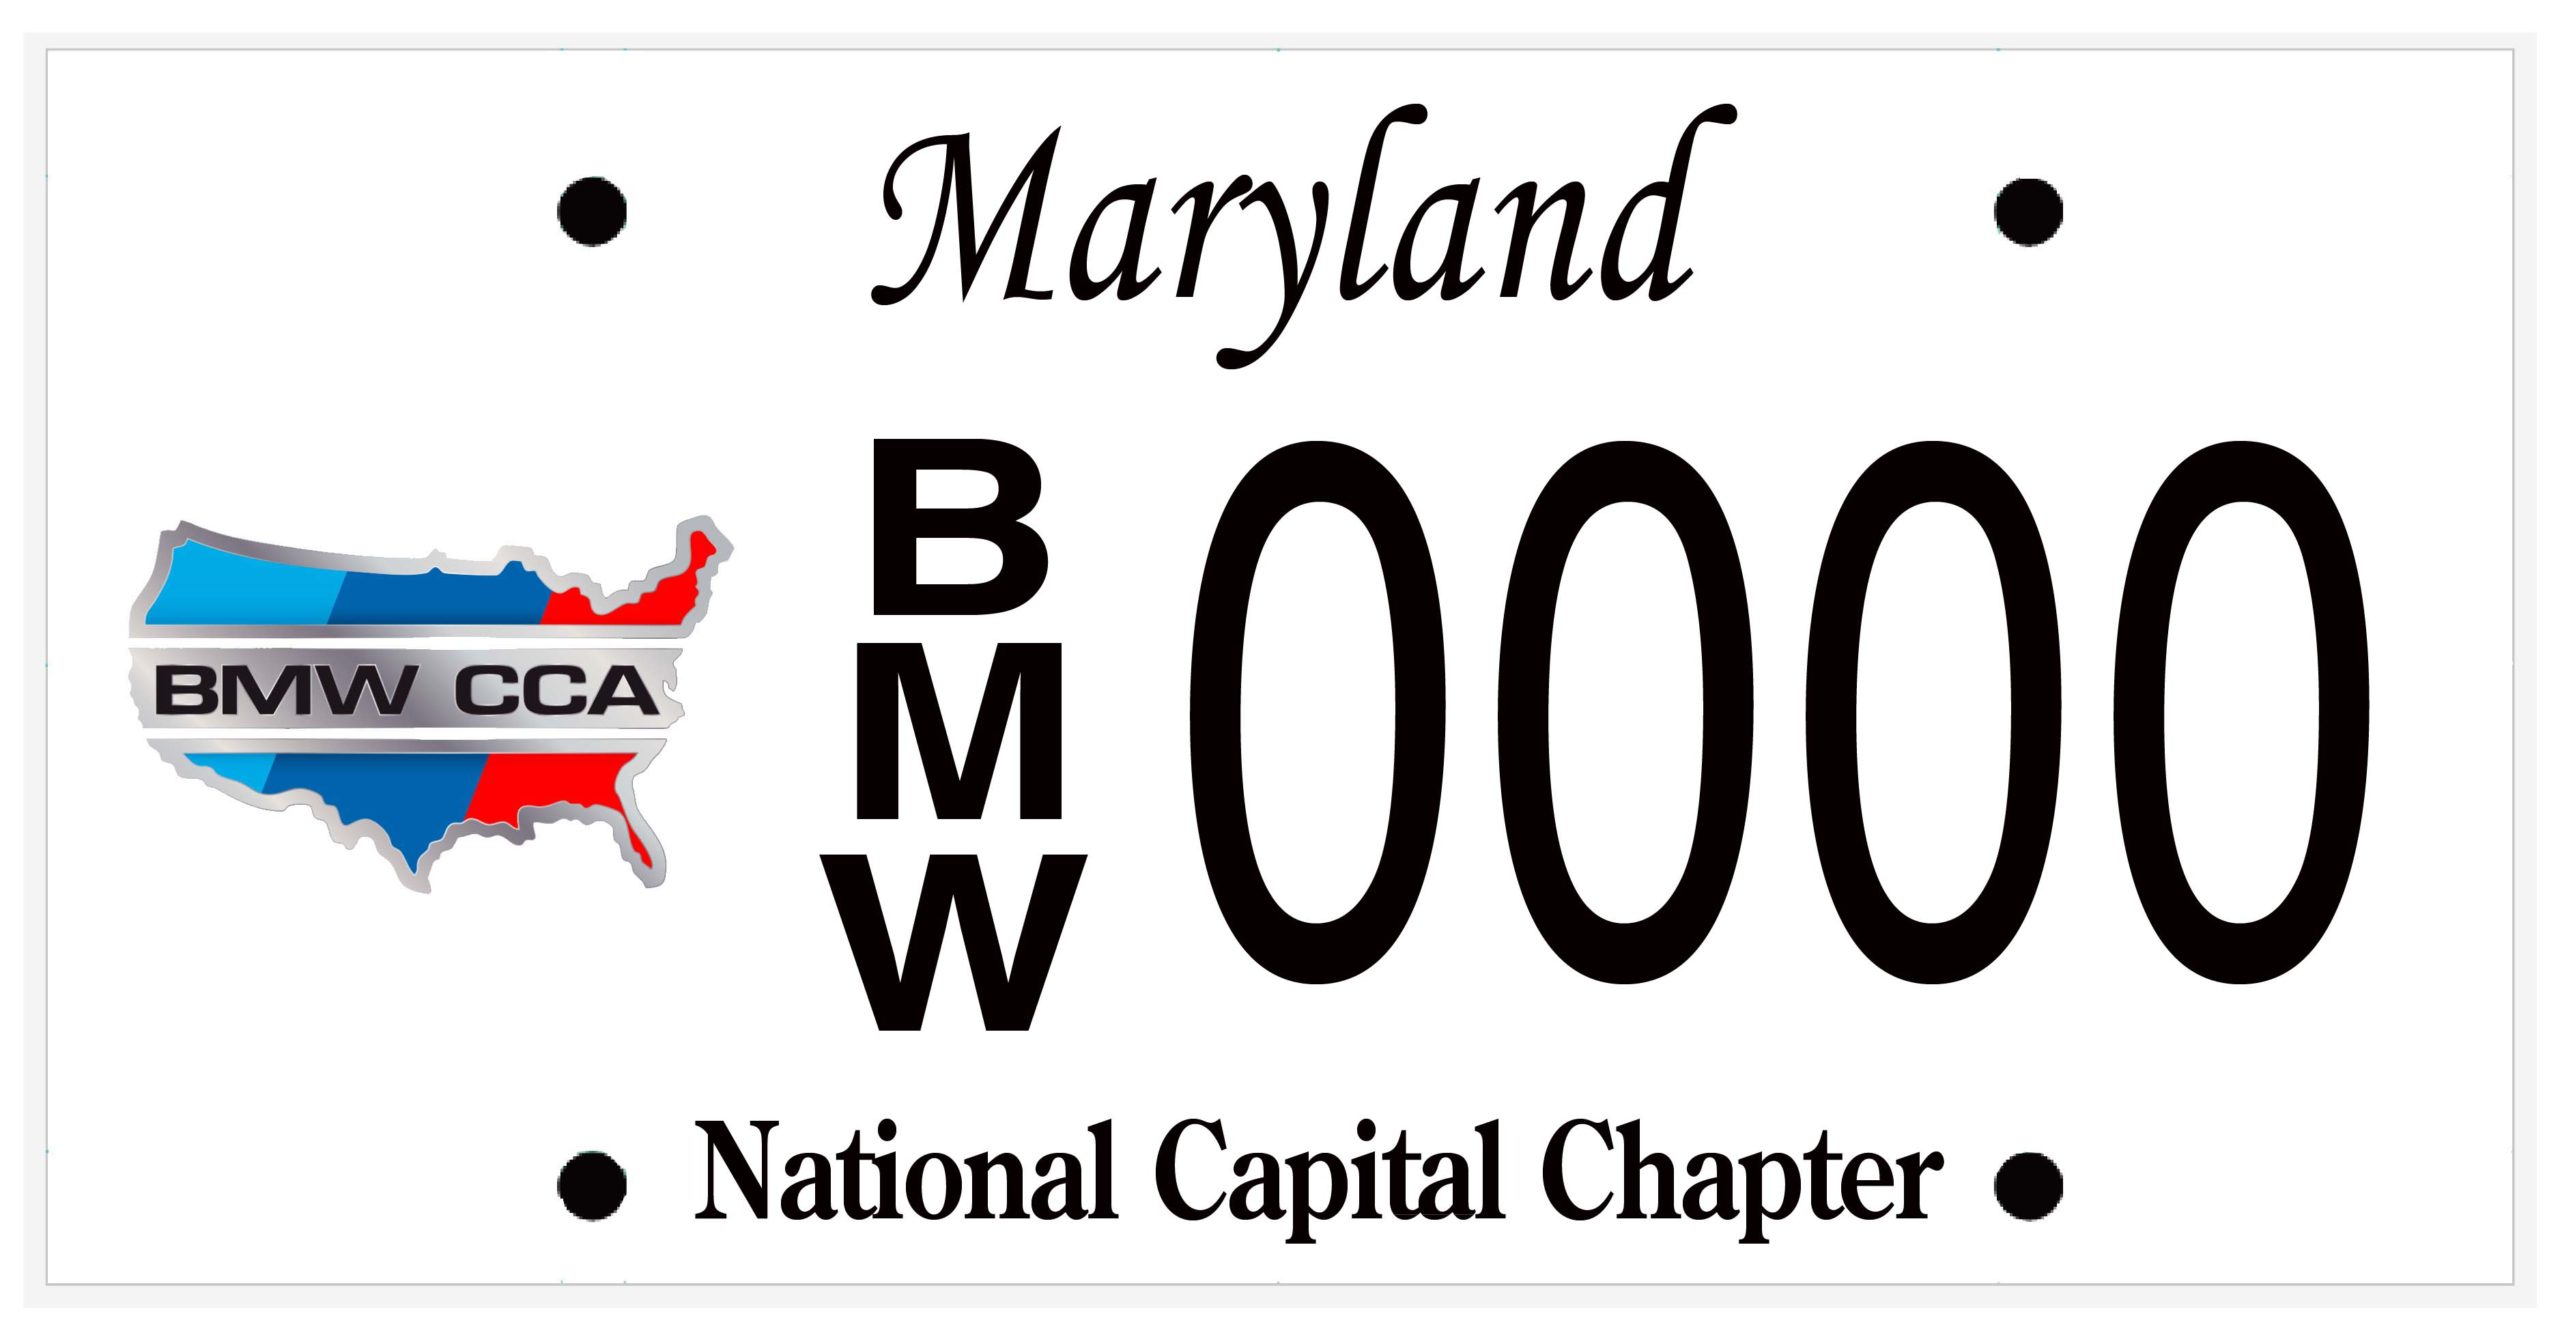 National Capital Chapter, BMW CCA - National Capital Chapter - BMW Car Club  of America